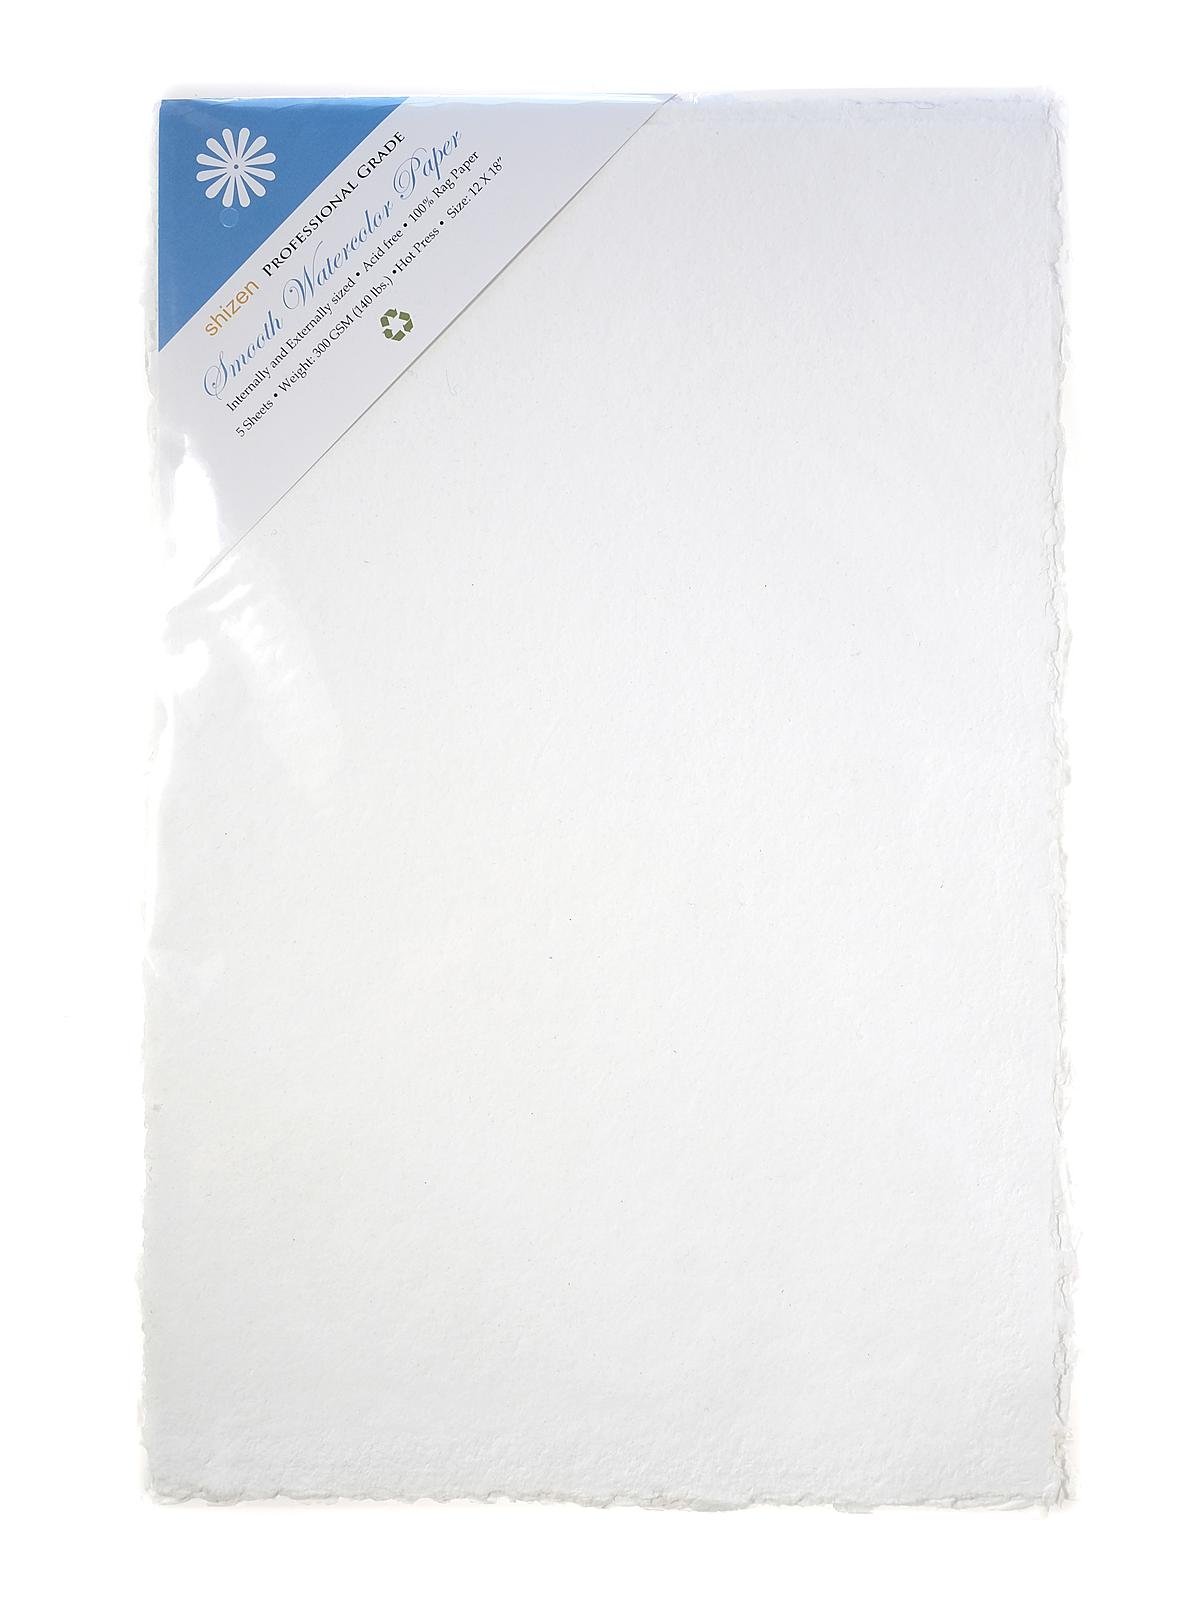 Shizen Design Rough Surface Watercolor Paper, 5 X 7 Inches, White